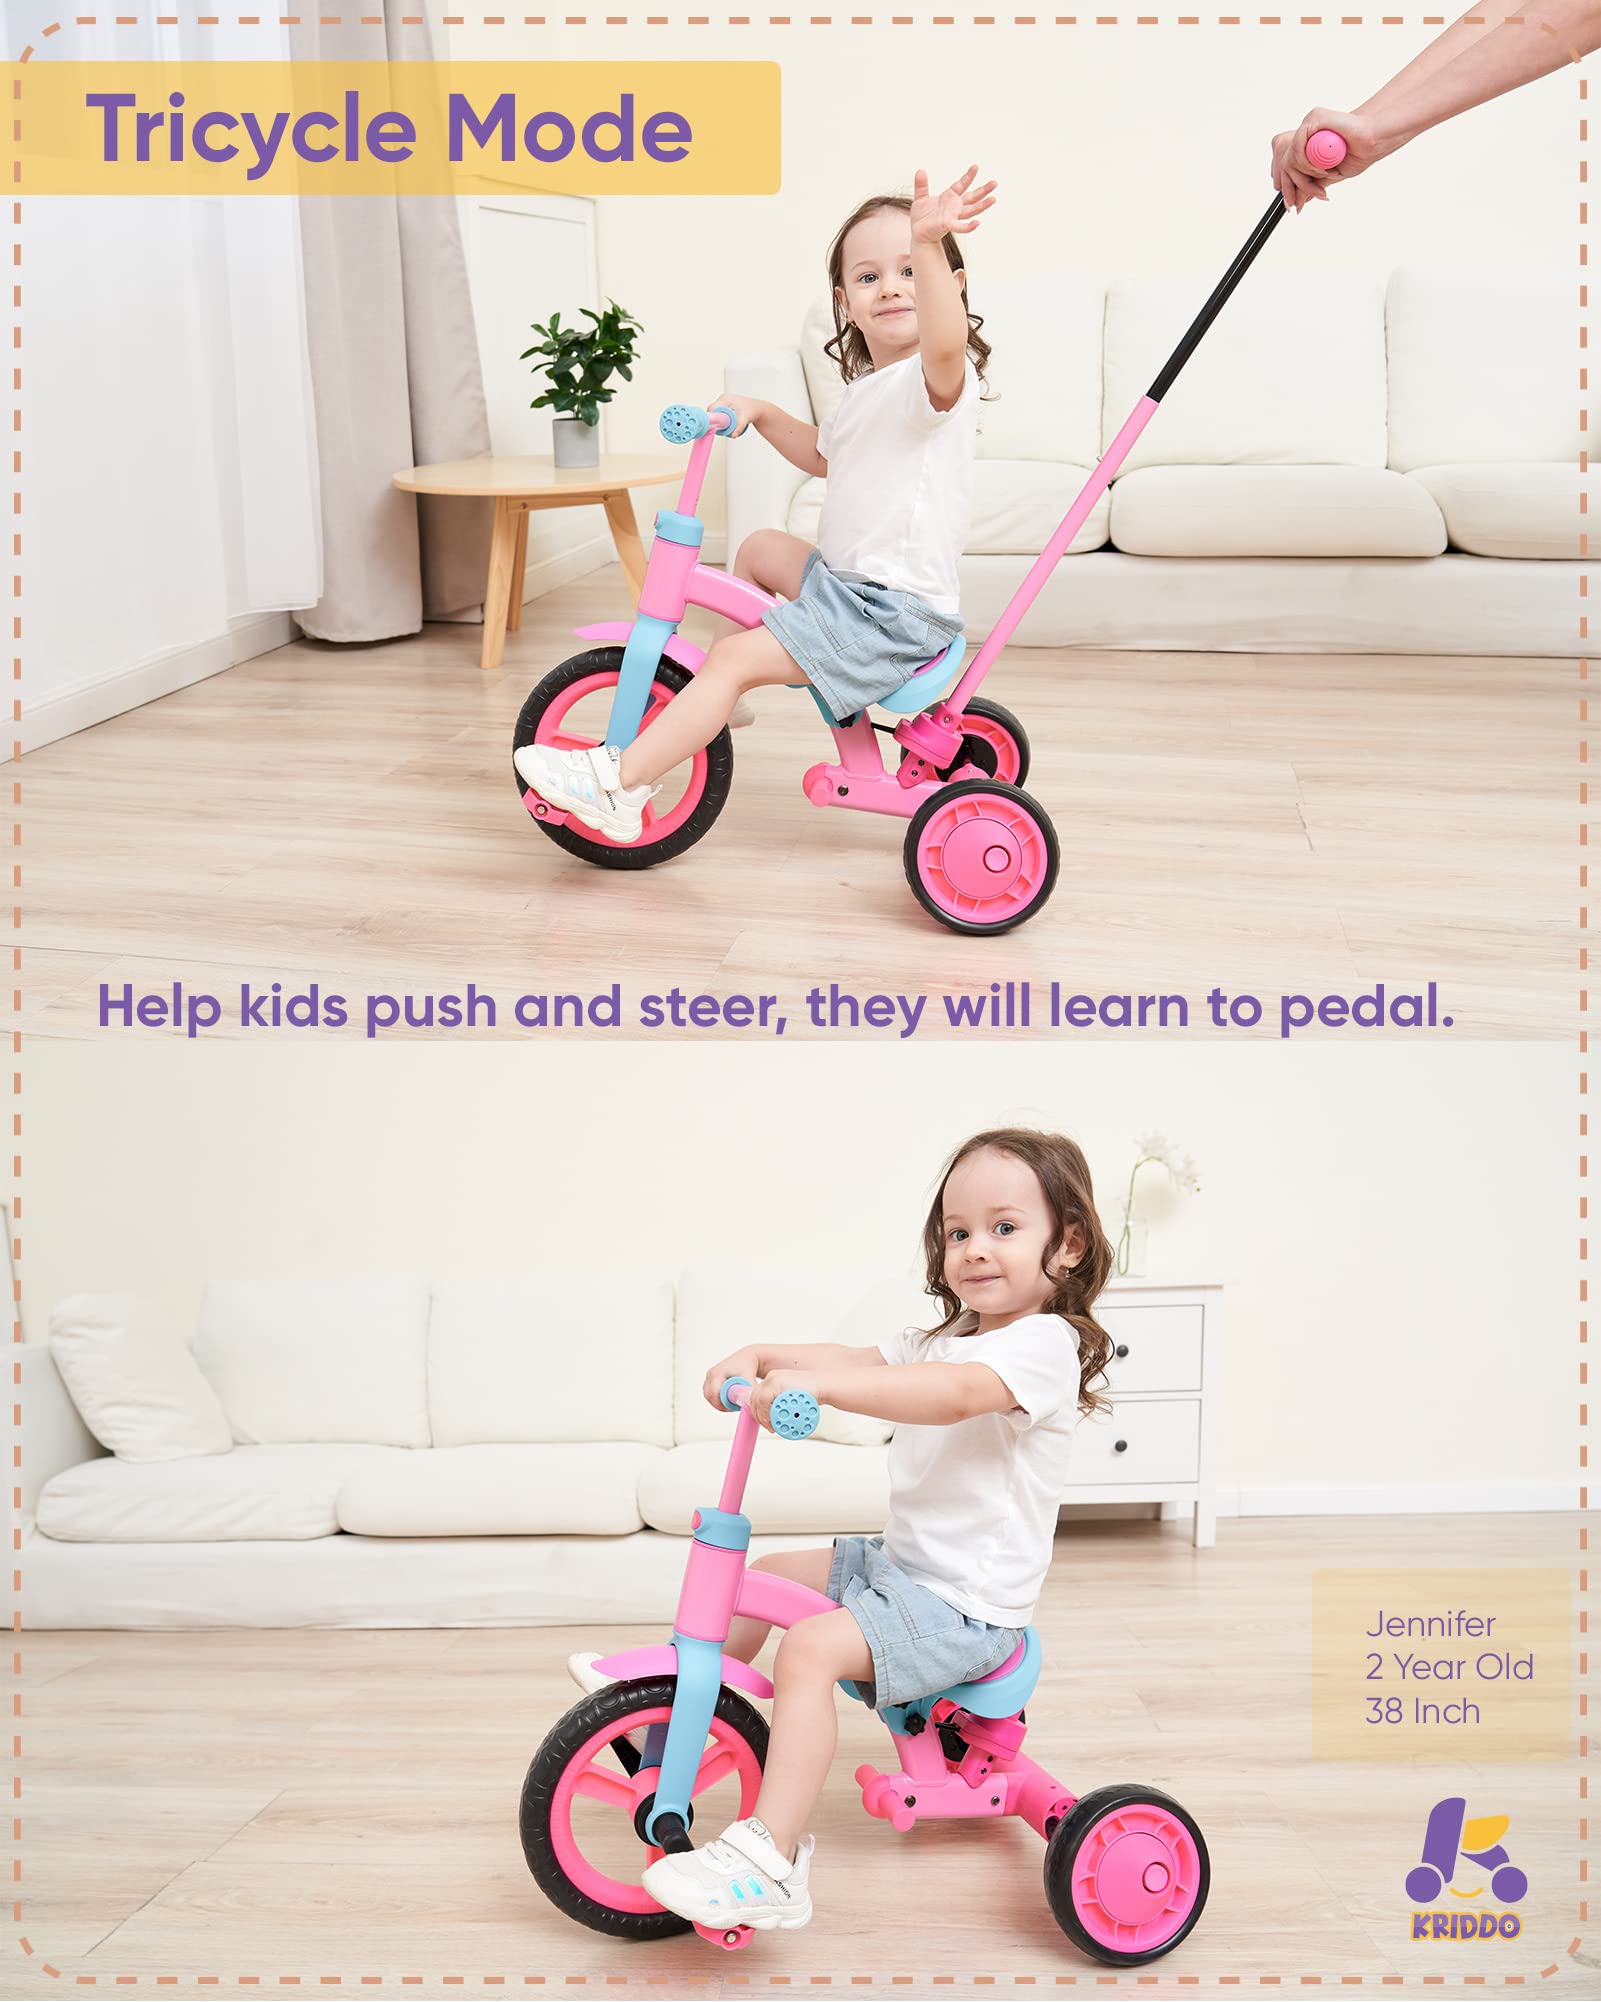 KRIDDO 4-in-1 Kids Tricycle for 1.5 to 3 Yea Old with Parent Steering Push Handle, 12 Inch Front Wheel Trike, Toddler Balance Bike for Boys Girls 18 Month to 3 Years, Adjustable Height, Pink